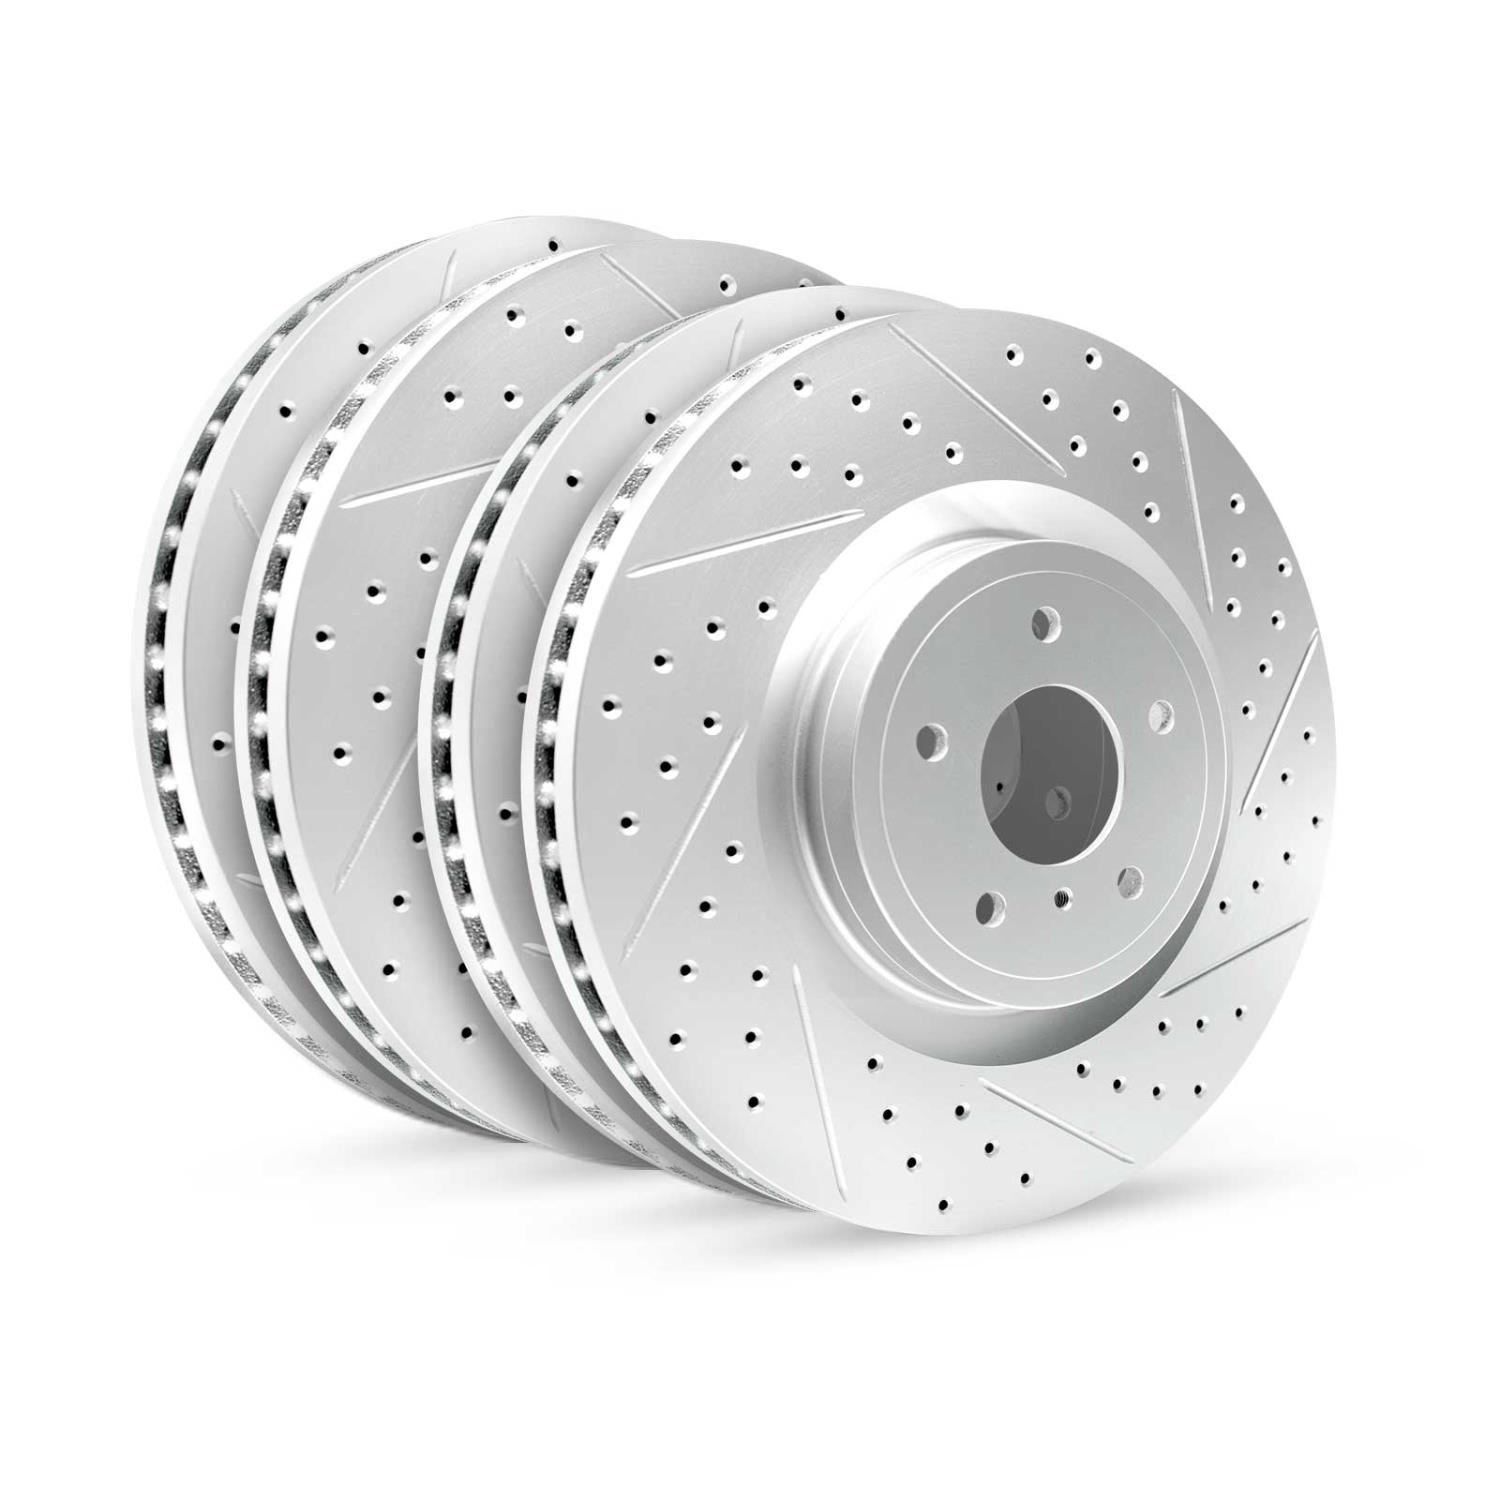 GEO-Carbon Drilled/Slotted Rotors, 1999-2005 Audi/Porsche/Volkswagen, Position: Front/Rear